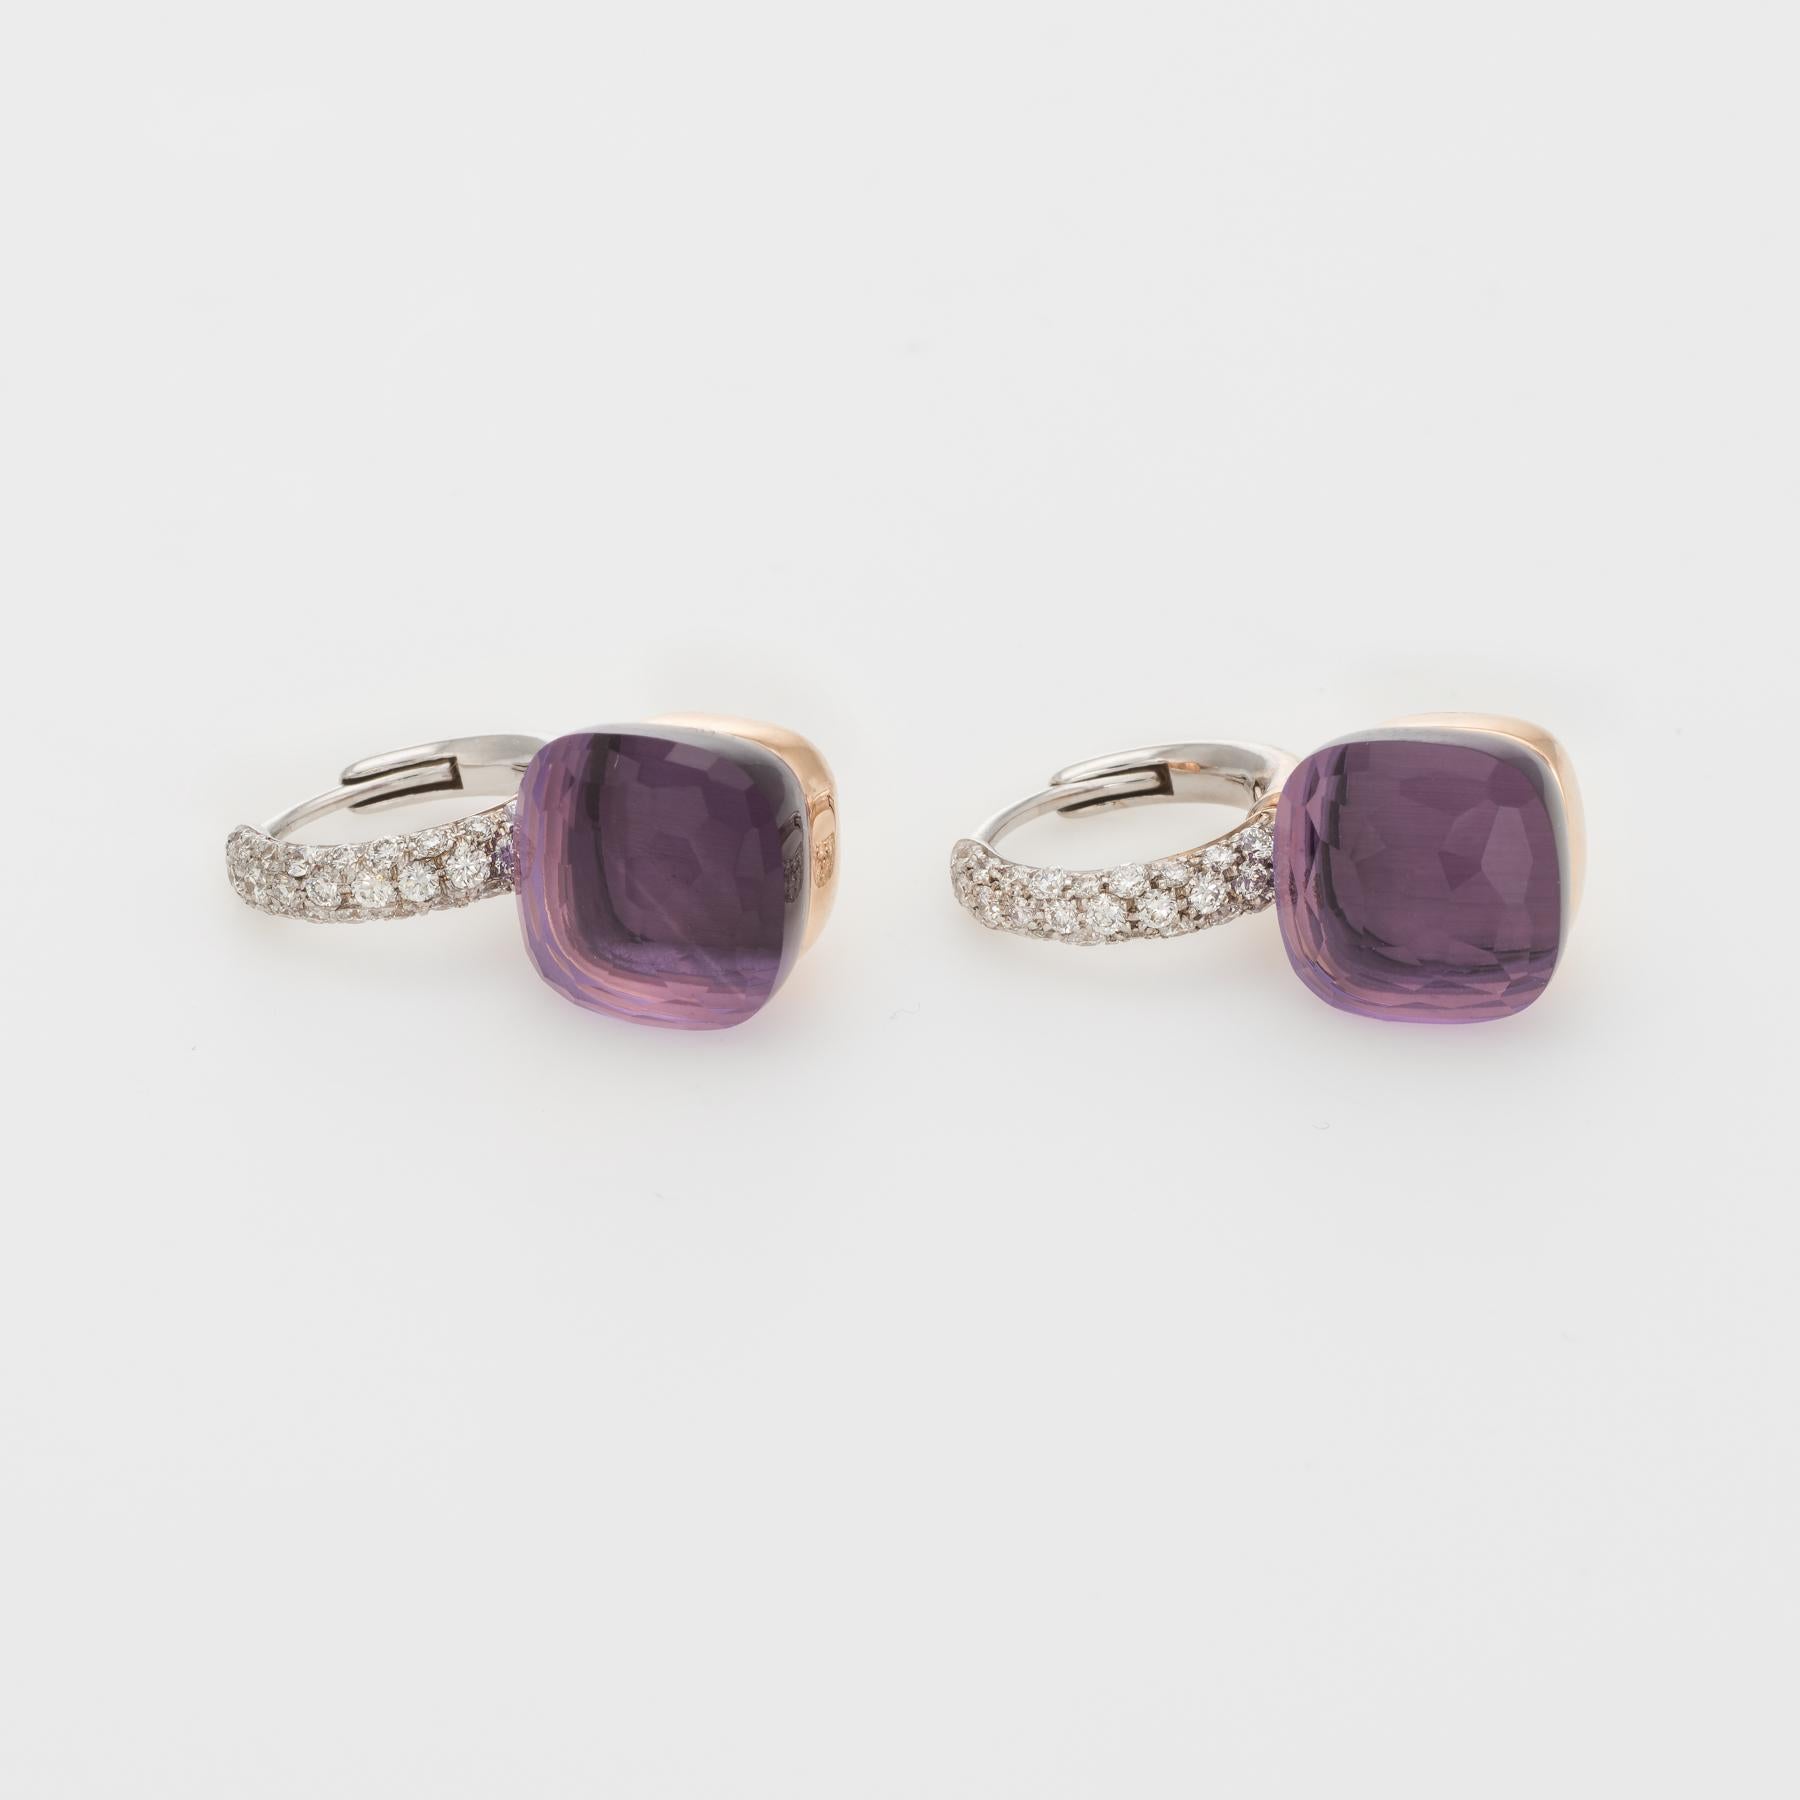 Finely detailed estate Pomellato Nudo earrings, crafted in 18 karat rose & white gold. 

Faceted amethyst each measures 10.4mm, (estimated at 5 carats each - 10 carats total estimated weight). The diamonds total an estimated 0.55 carats (estimated